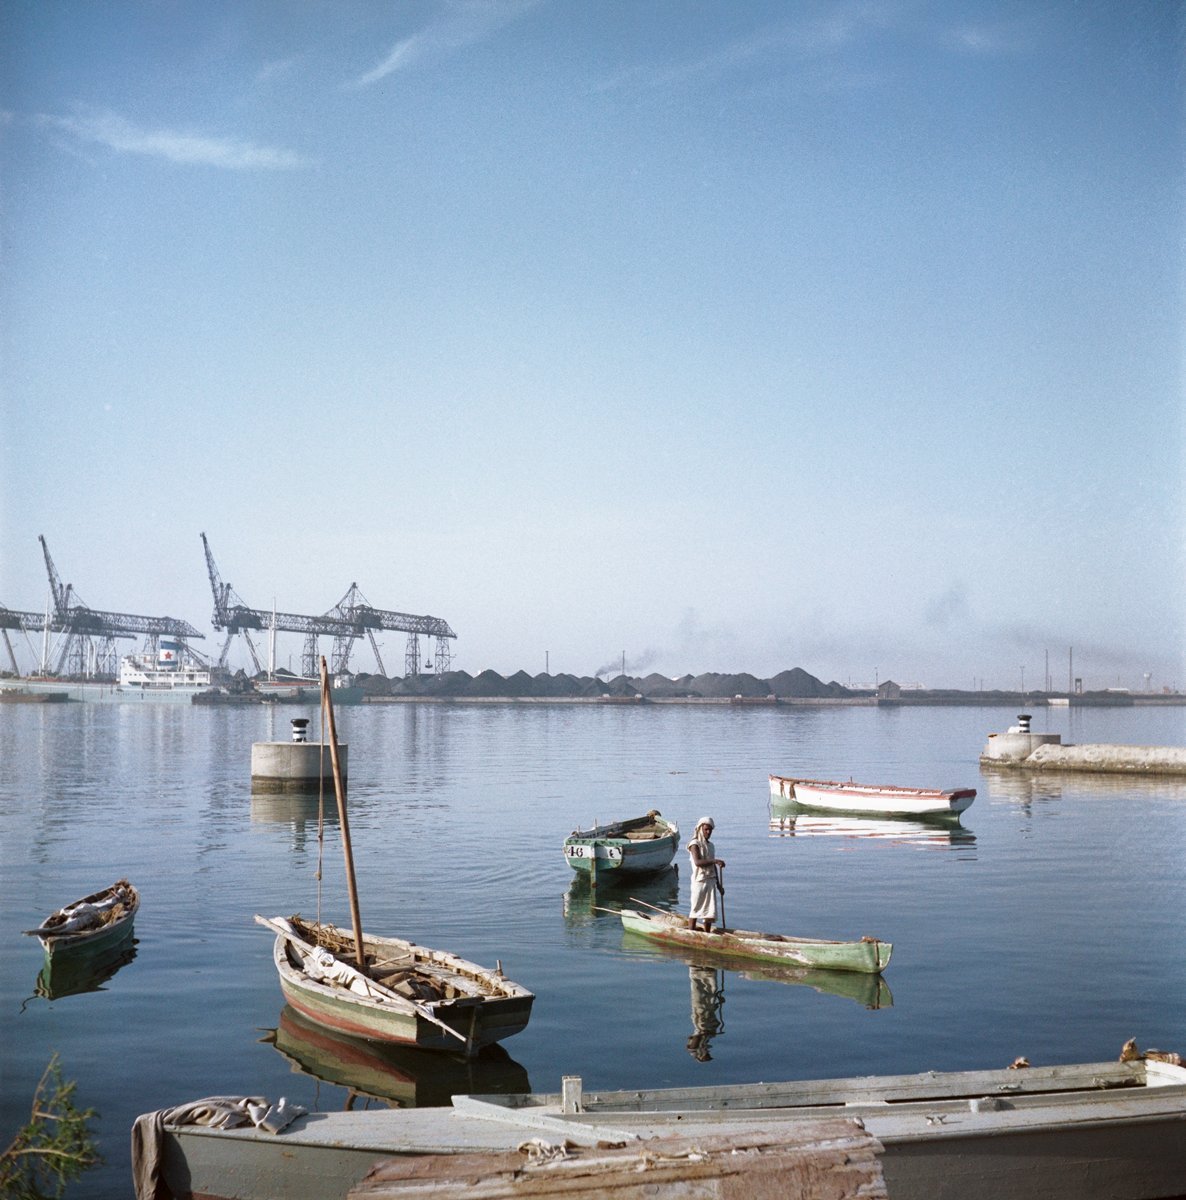  Todd Webb (United States, 1905-2000),  Untitled (44UN-7961-222), Sudan  [Man poling a boat through the harbor, with oil rigs in the background] ,  1958, archival pigment print, 20 x 20 inches (image), 22 x 22 inches (sheet). © Todd Webb Archive 